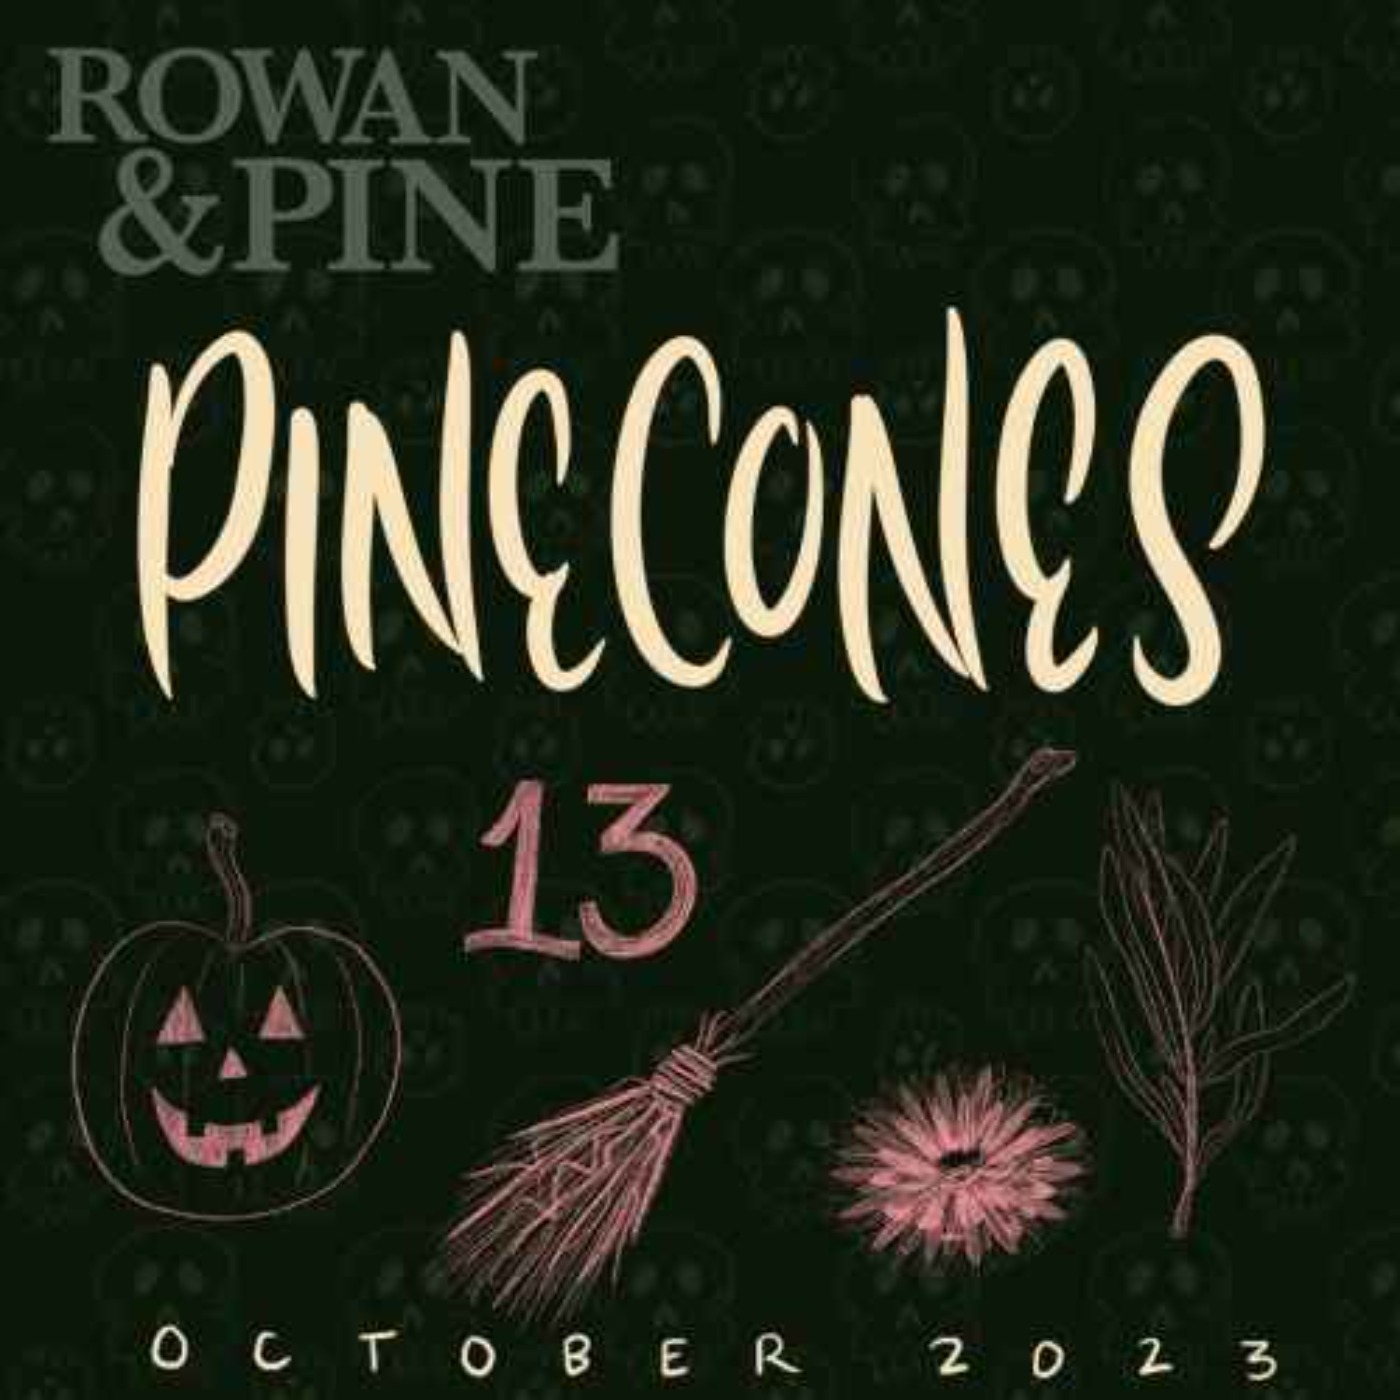 Pine Cones: Witches' Brooms | Rowan & Pine Shorts